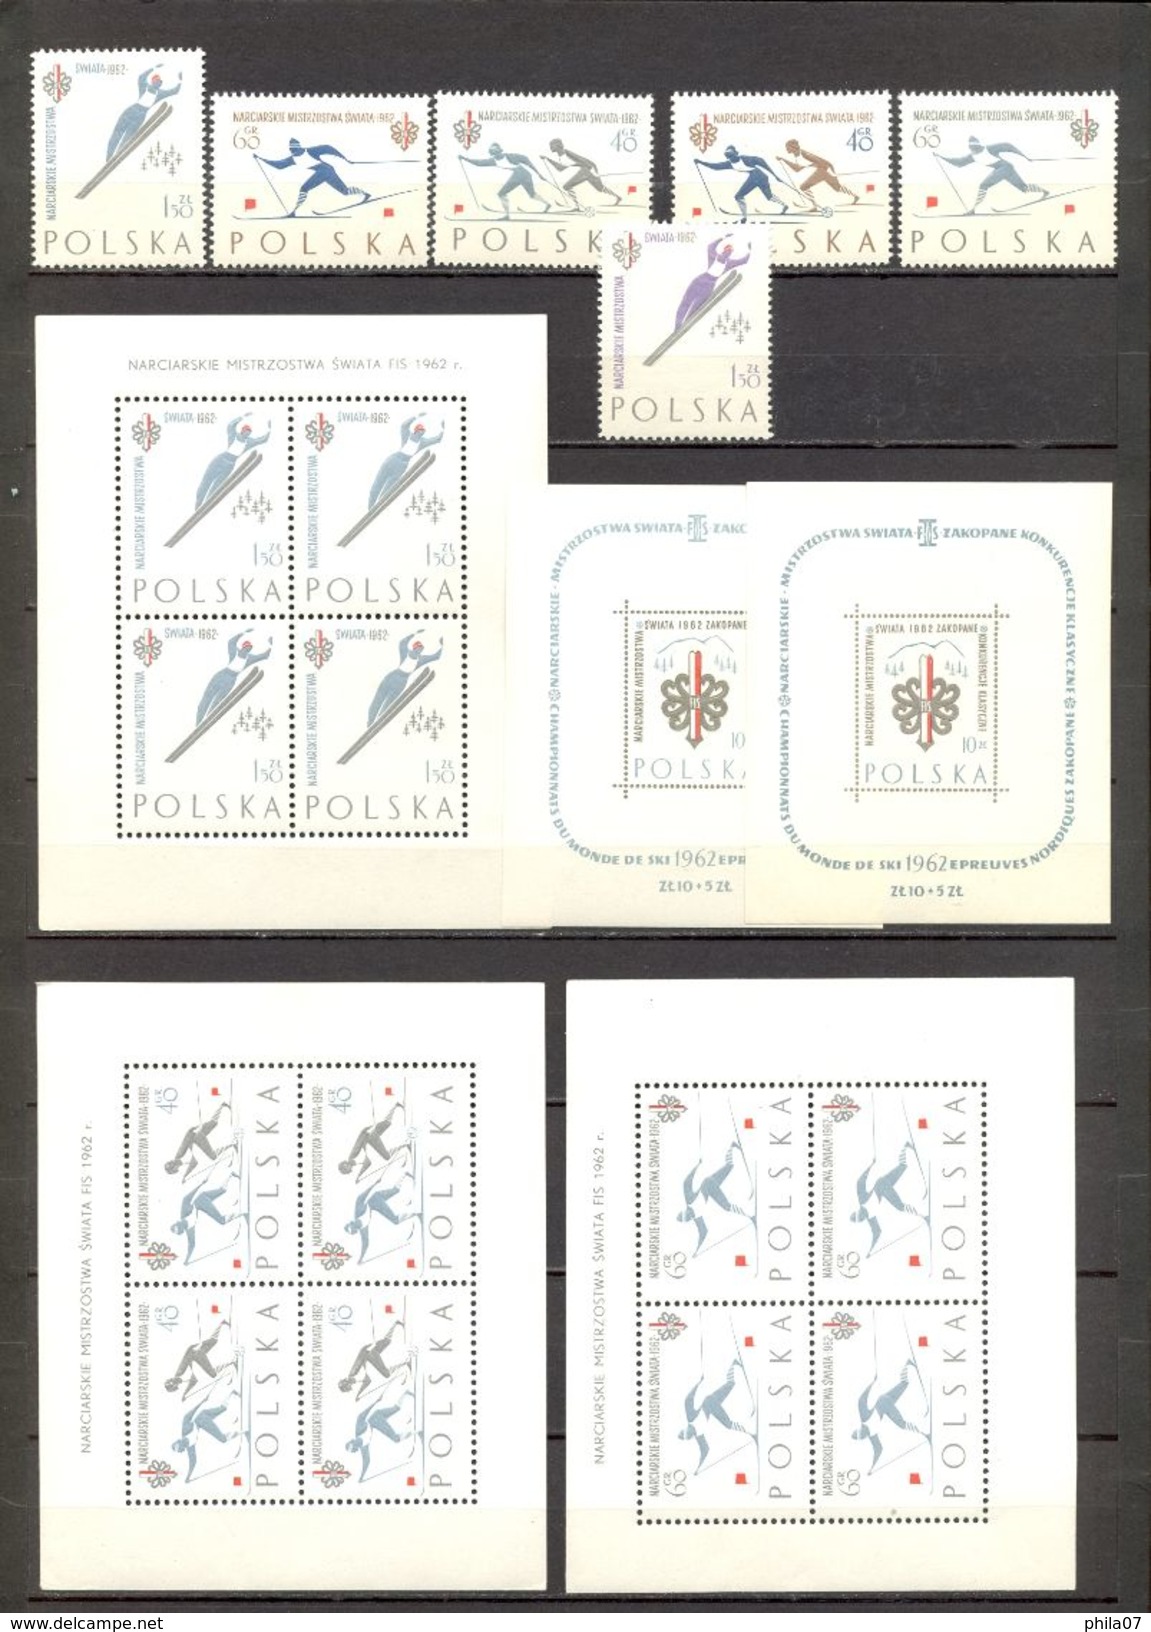 Poland - 1962, SWIATA FIS, Two Blocks, Sheet And Series, All MNH. / See Scans, 5 Scans - Unused Stamps